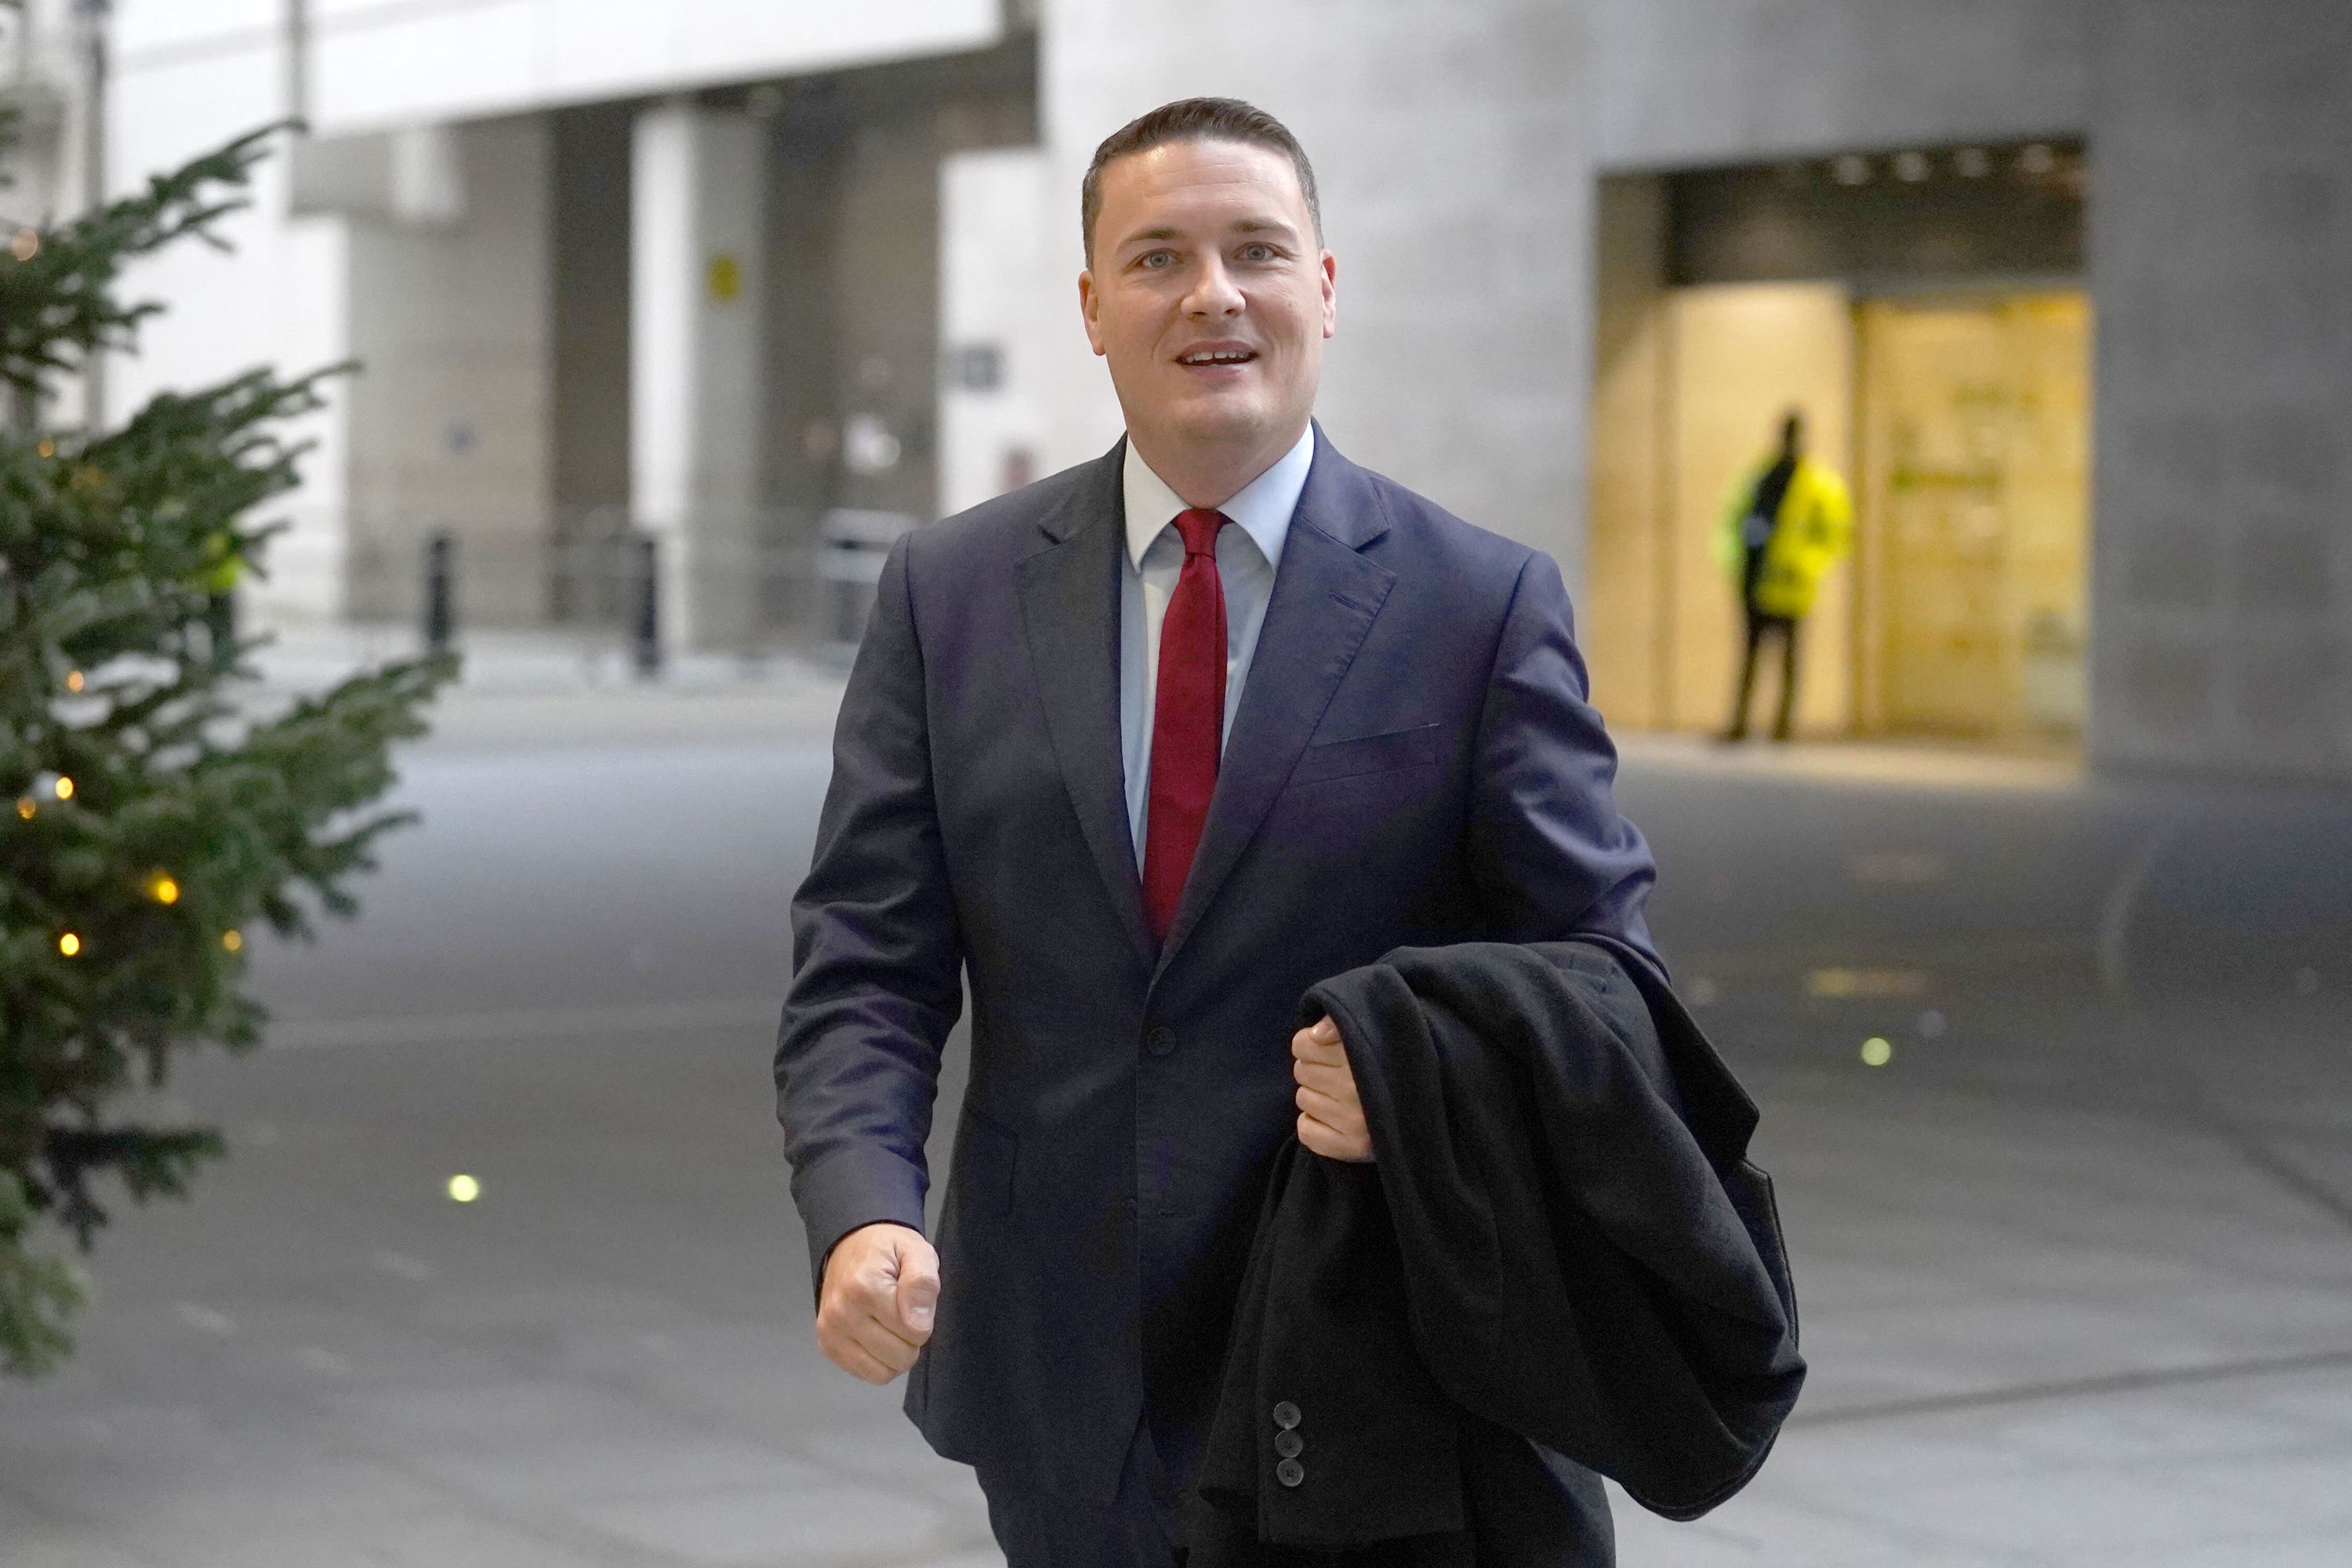 Shadow health secretary Wes Streeting says the prime minister ‘cannot continue to wash his hands of the crisis in the NHS’